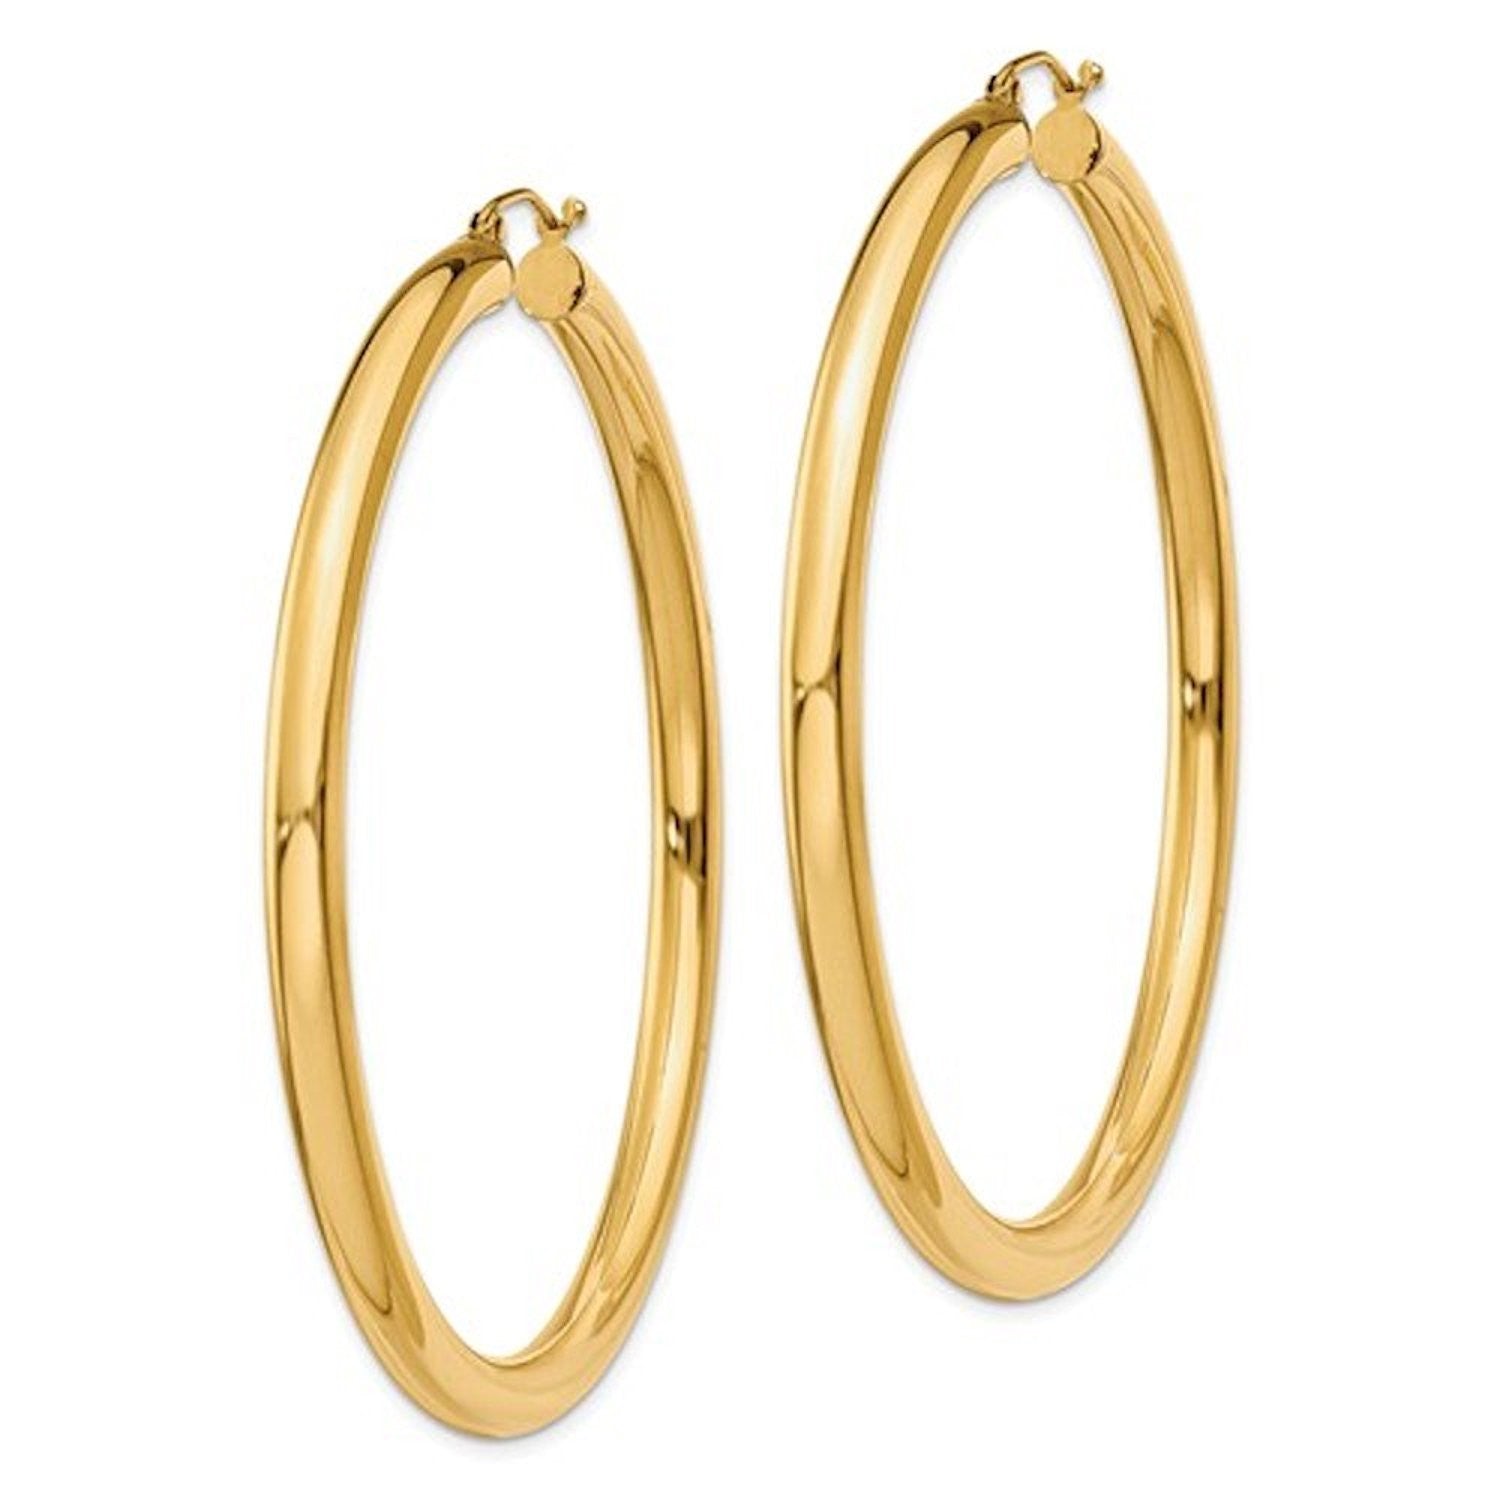 14K Yellow Gold Large Classic Round Hoop Earrings 60mmx4mm